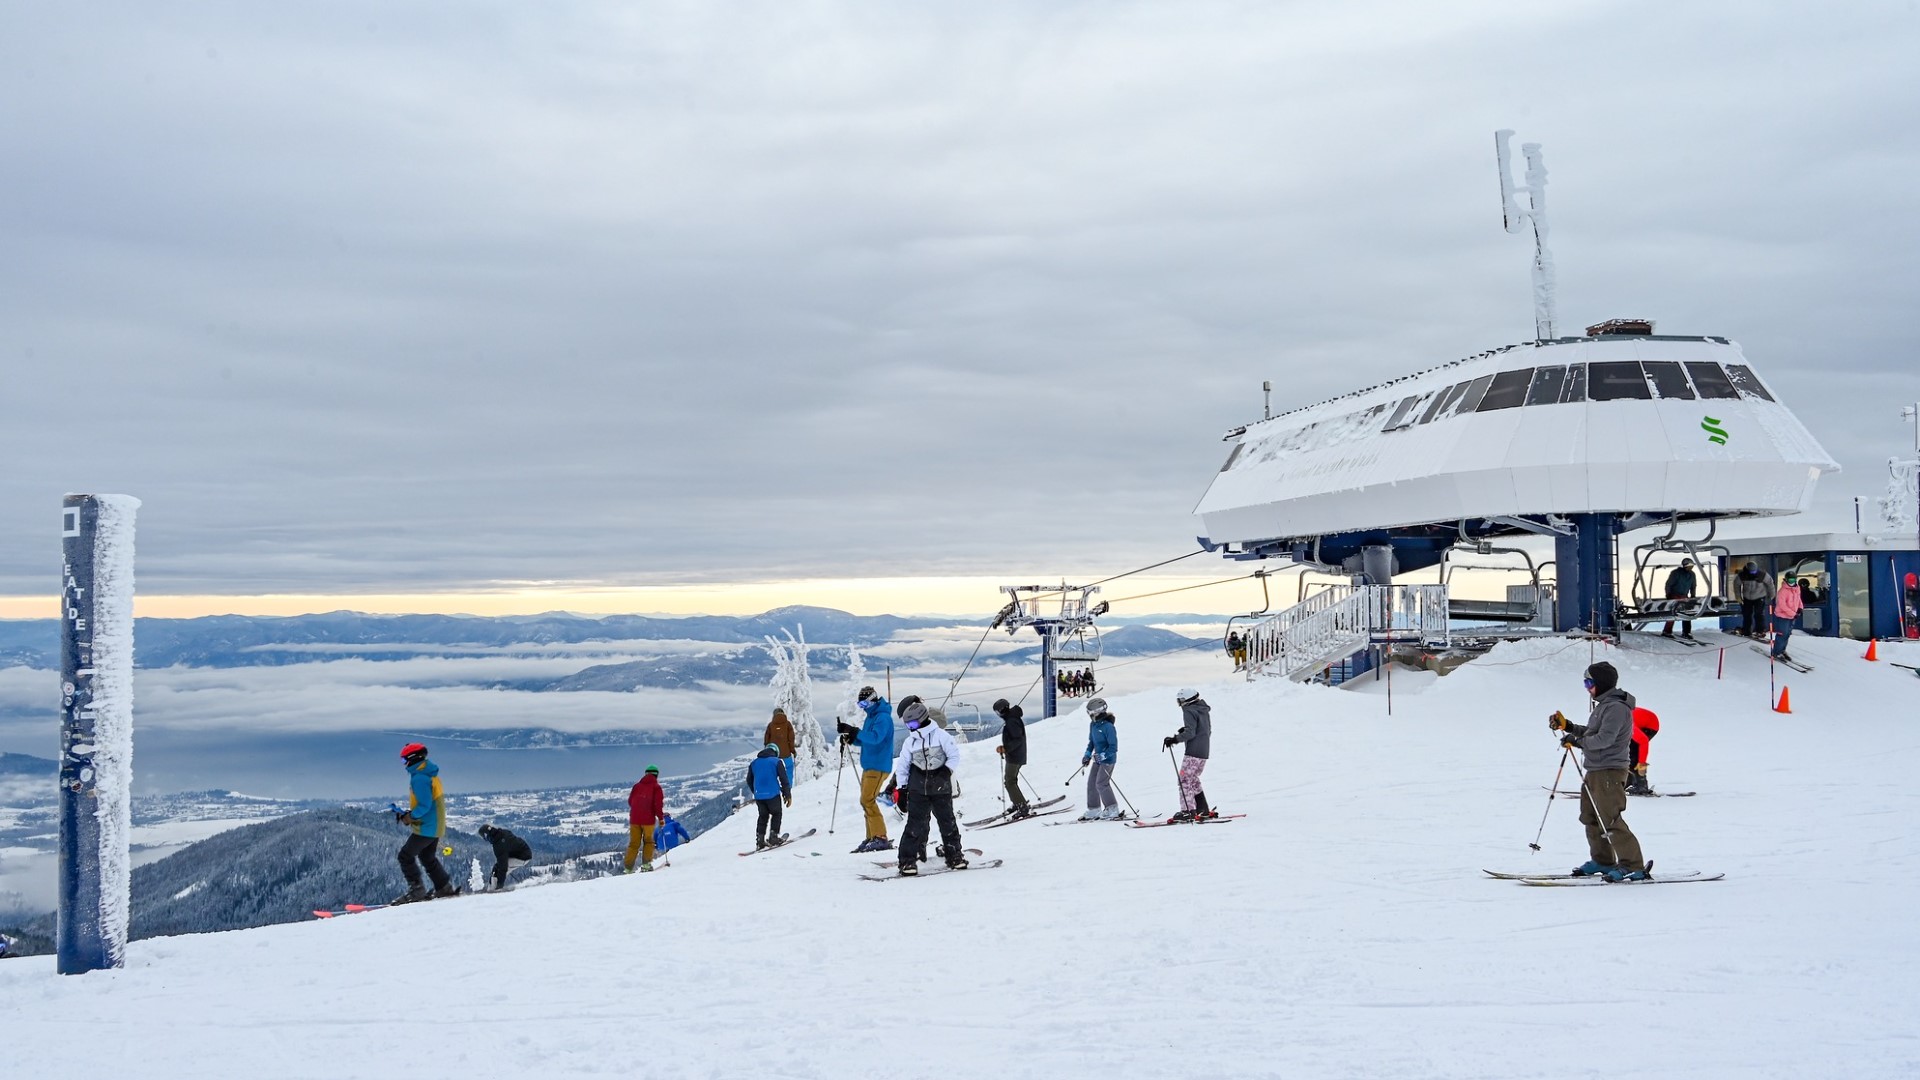 The premiere ski spot has been purchased by Alterra Mountain Co., an outside company that plans to continue to make Schweitzer the ski destination for years to come.